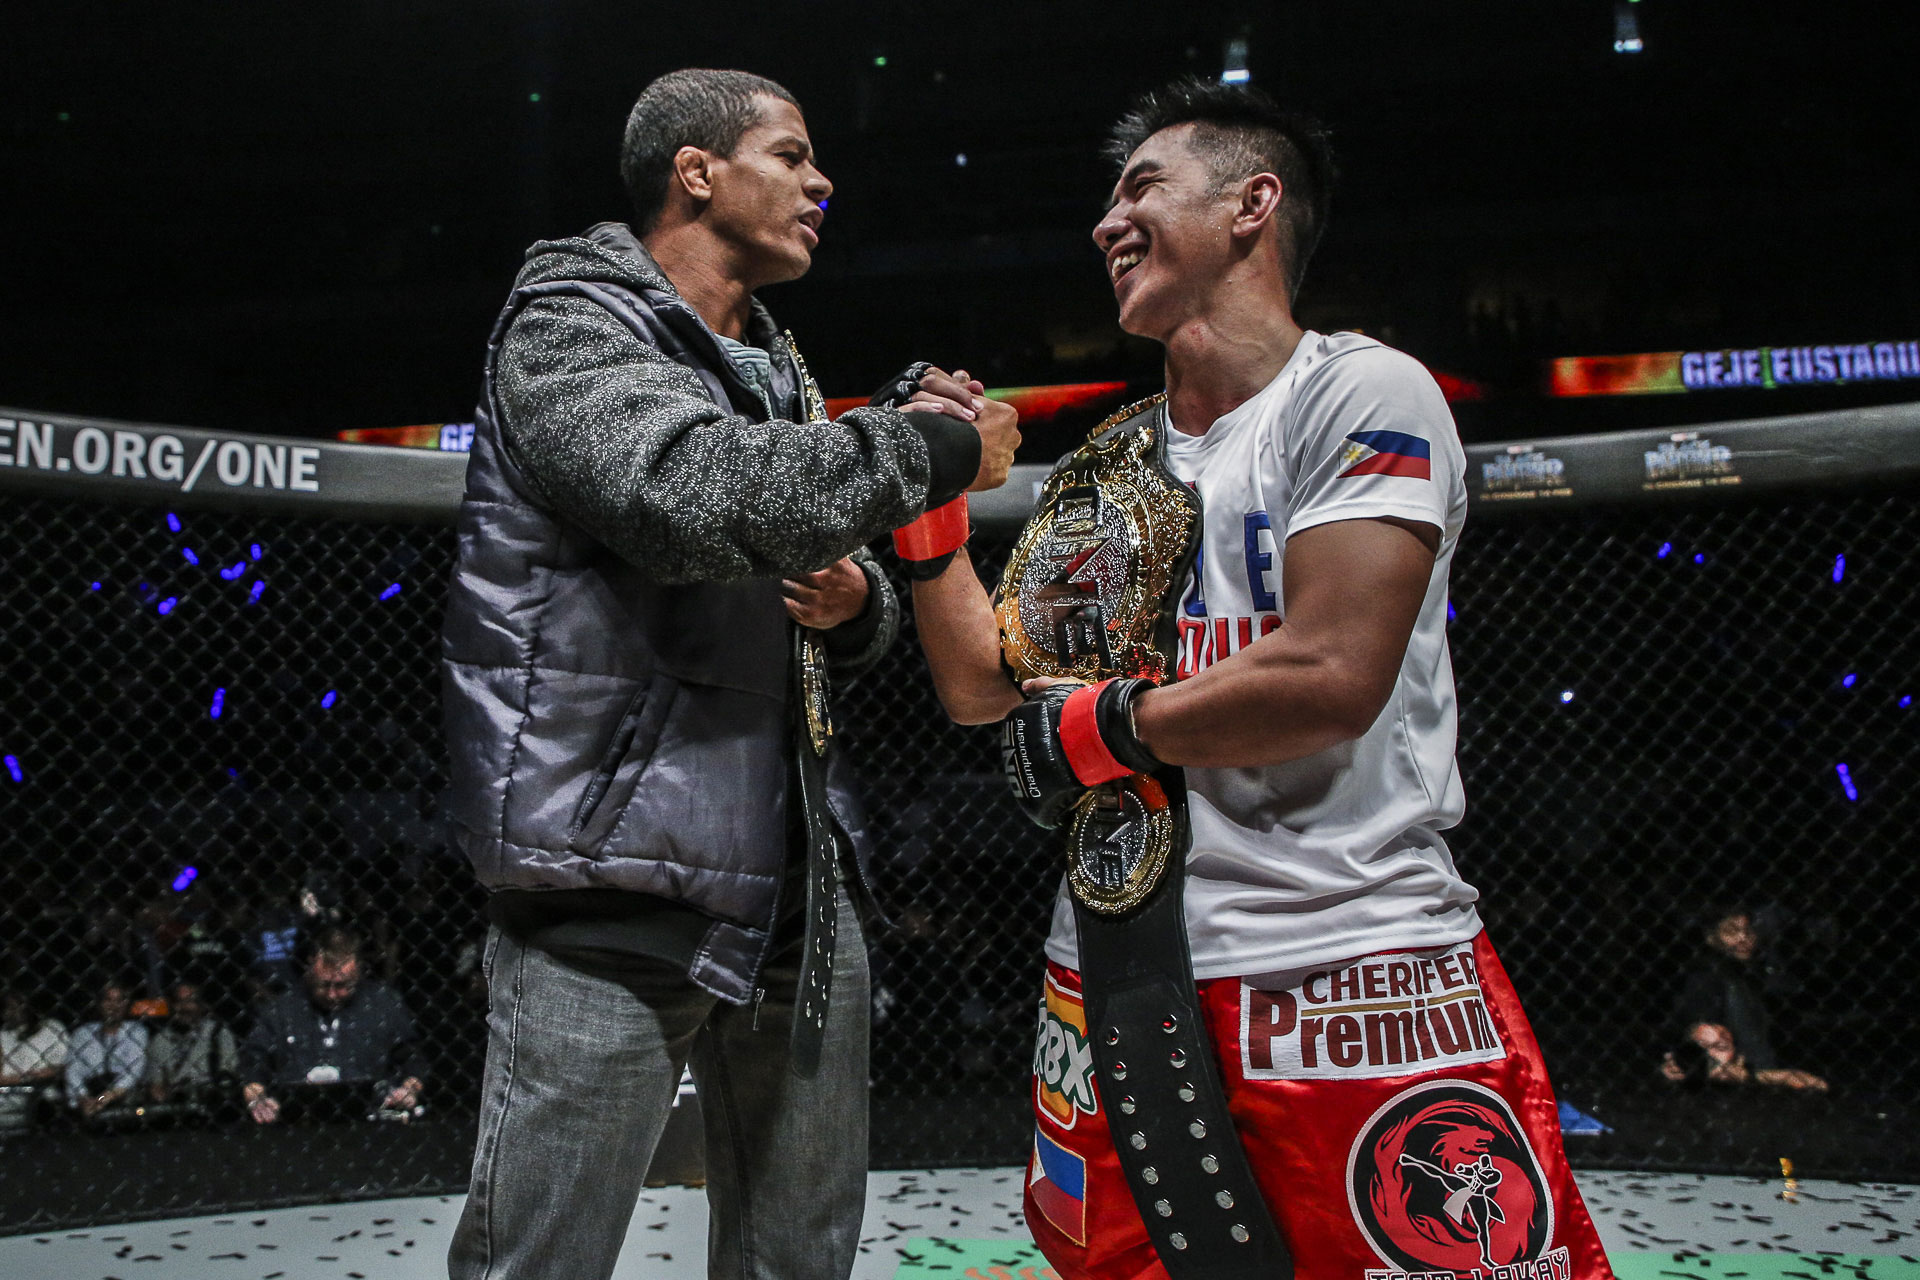 ONE-Global-Superheroes-Geje-Eustaquio-x-Adriano-Moraes Fil-Aussie Reece McLaren challenges Adriano Moraes for ONE Flyweight crown Mixed Martial Arts News ONE Championship  - philippine sports news